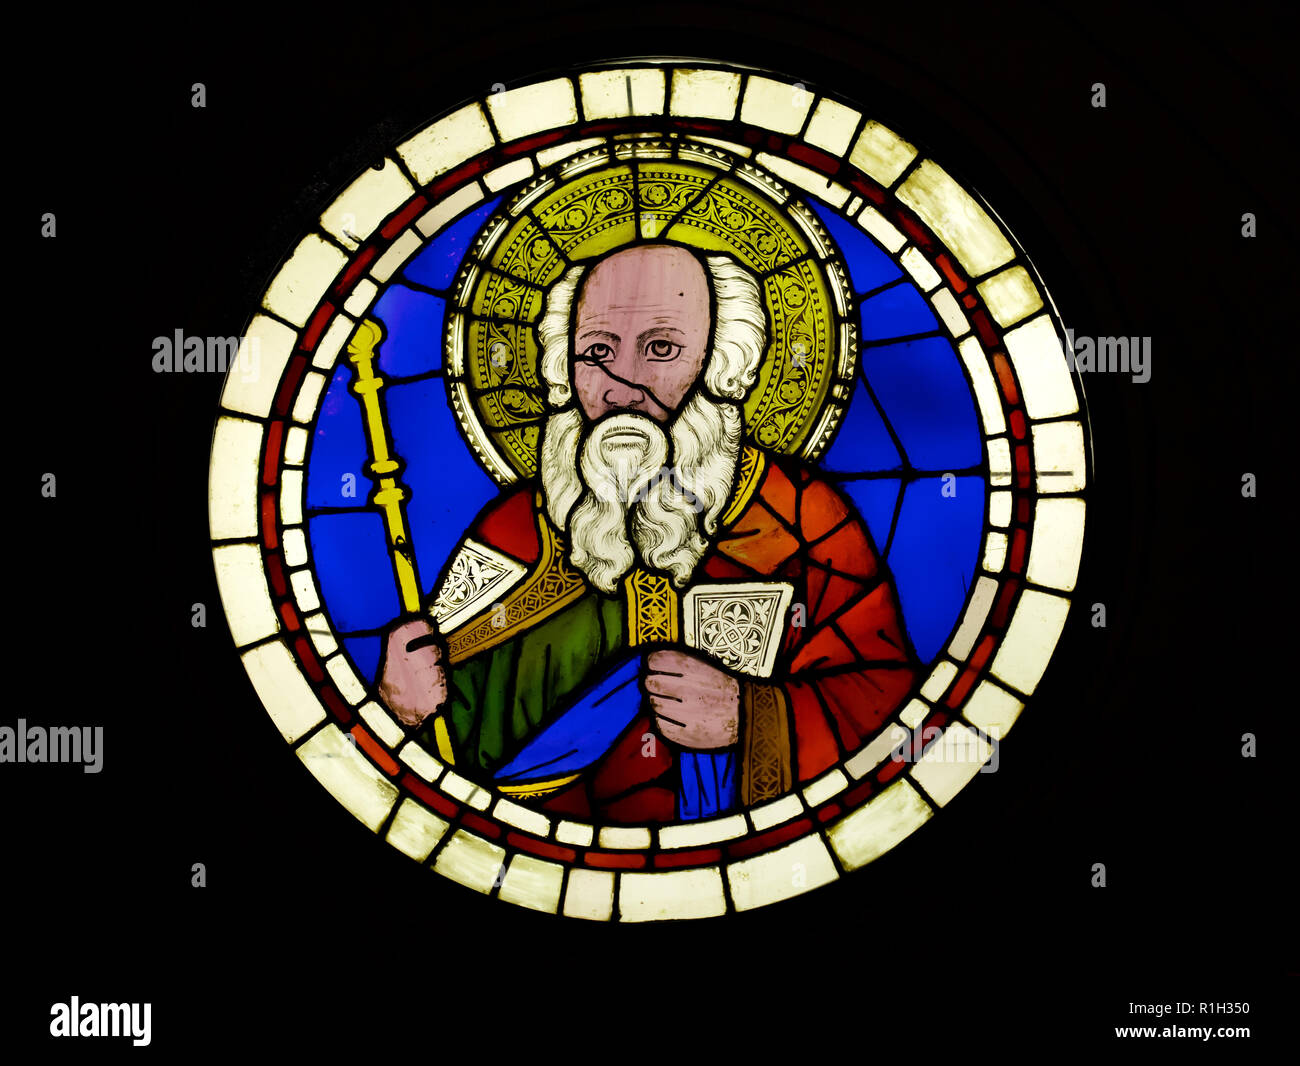 Aaron depicted in the stained-glass window designed by Italian Renaissance painter Giotto di Bondone dated from the early 14th century on display in the Museo dell'Opera di Santa Croce (Museum of the Works of the Basilica of the Holy Cross) in Florence, Tuscany, Italy. Stock Photo